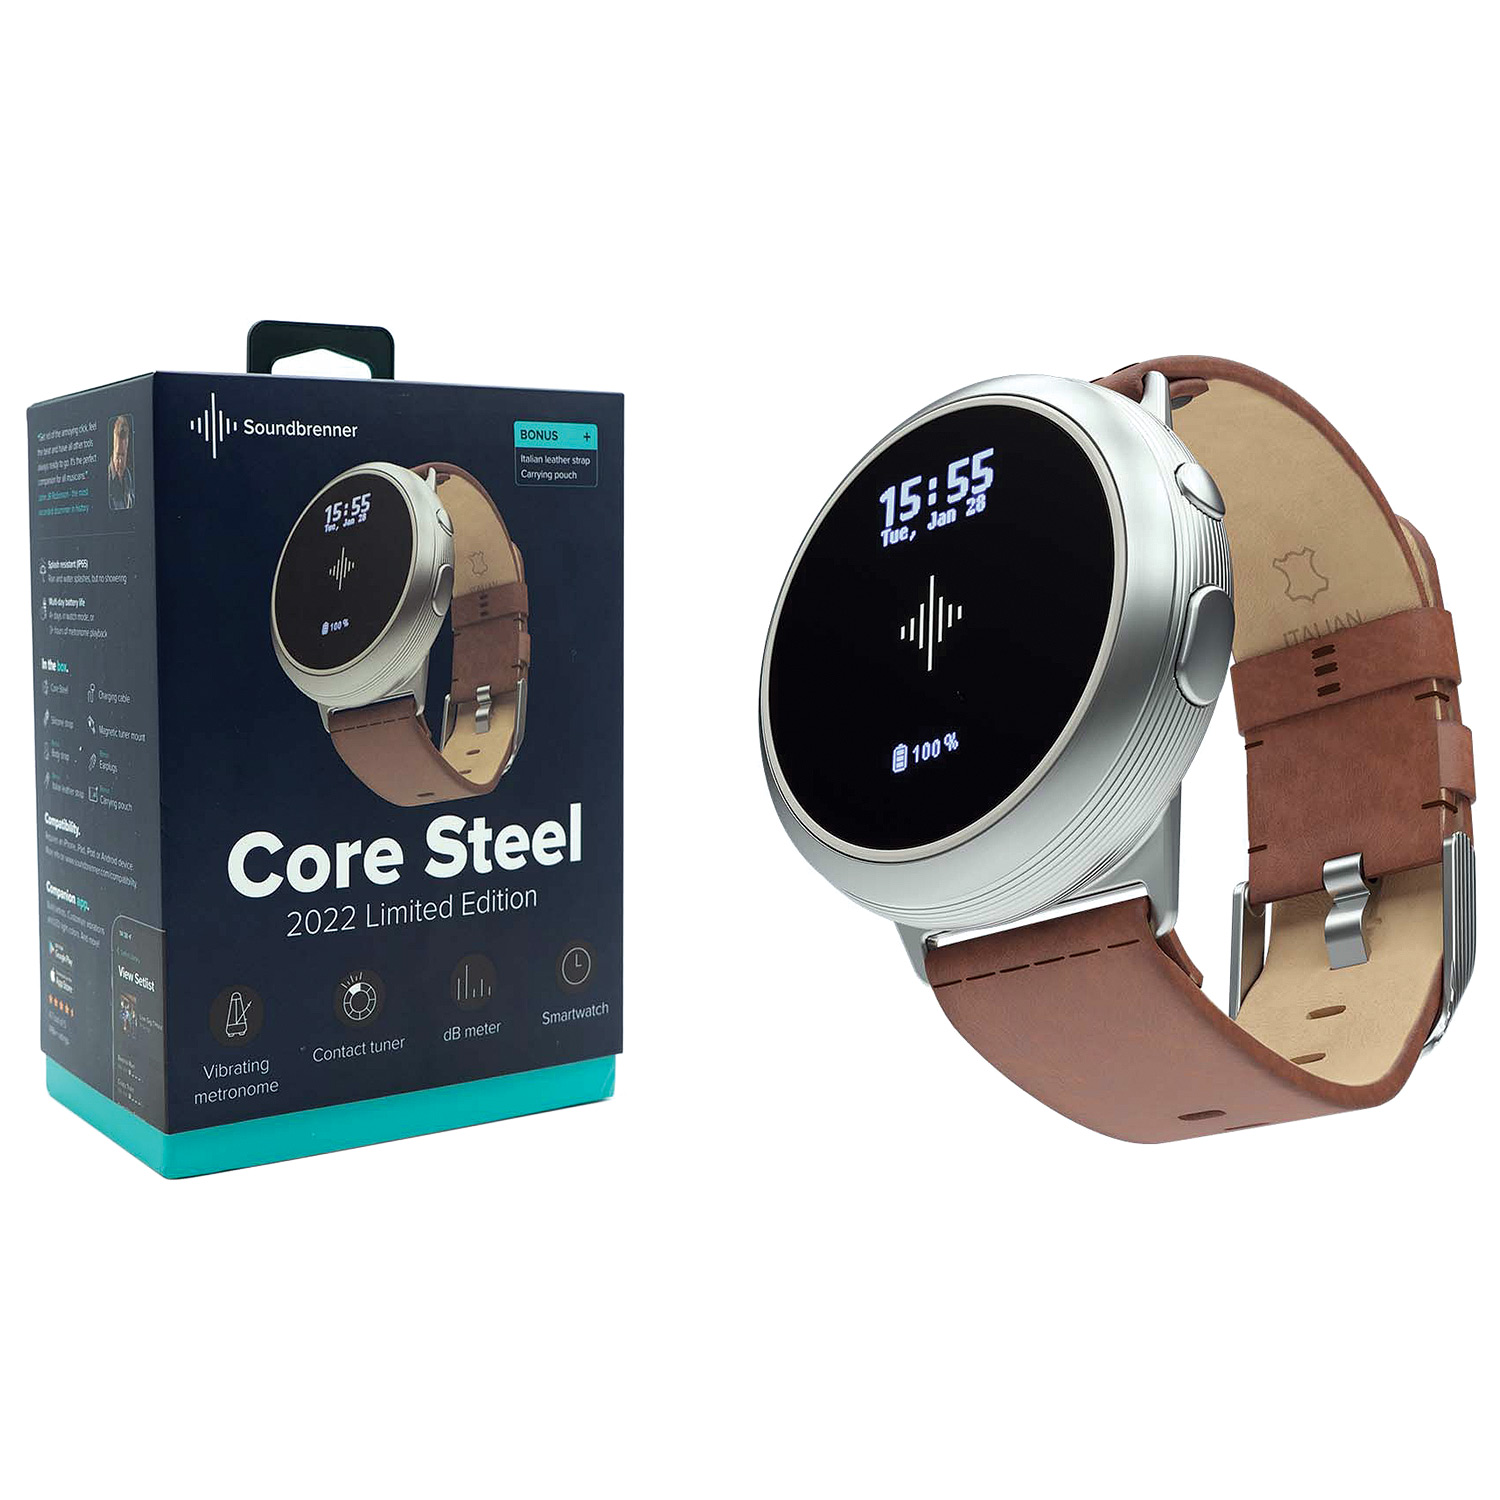 Soundbrenner 2022 Limited Edition Core Steel Smart Metronome with 